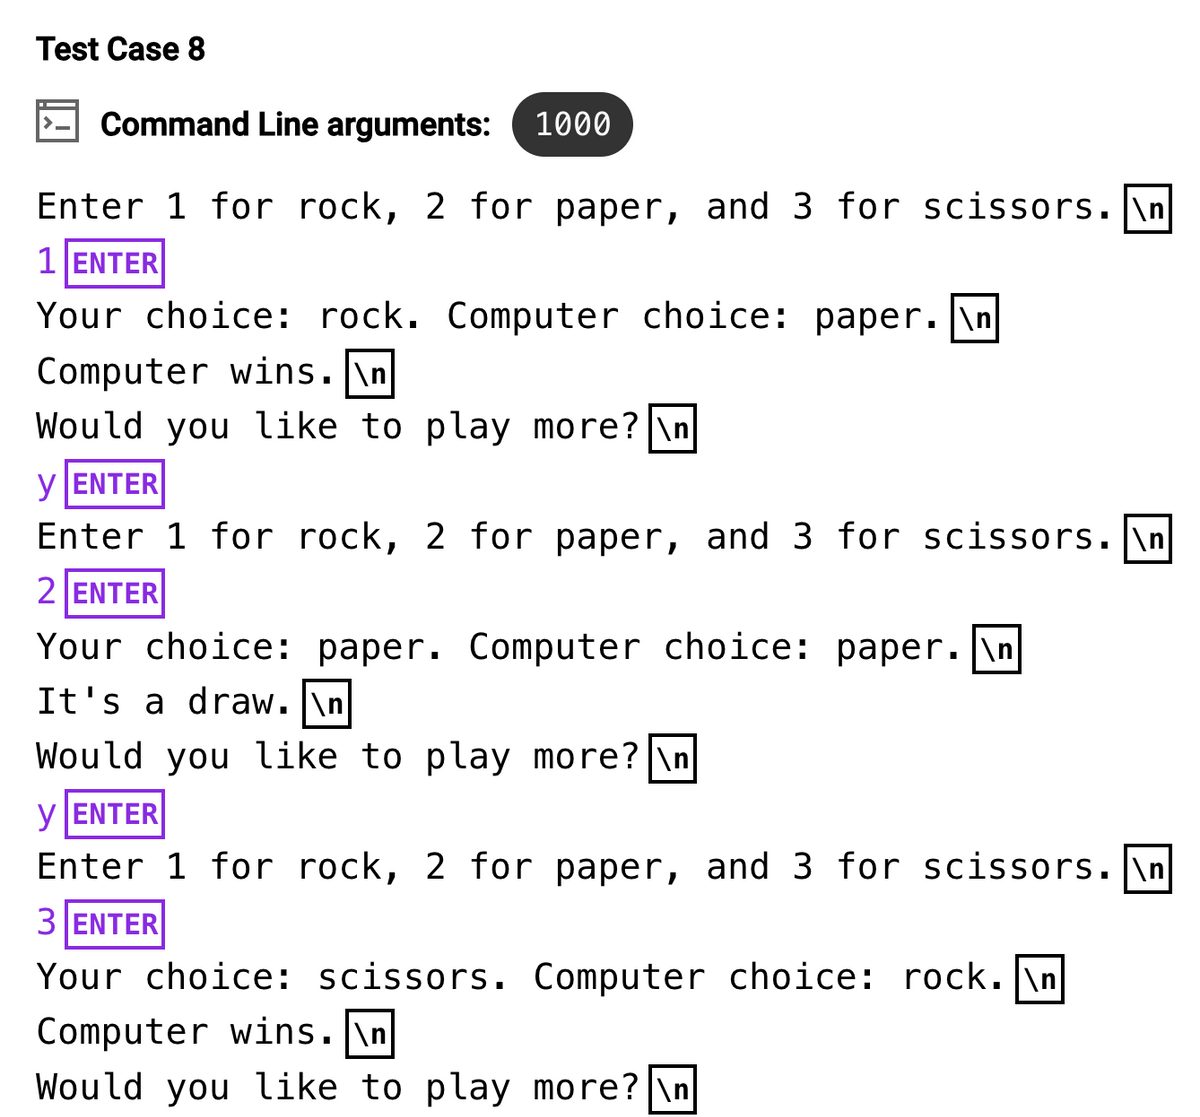 Test Case 8
Command Line arguments: 1000
Enter 1 for rock, 2 for paper, and 3 for scissors.\n
1 ENTER
Your choice: rock. Computer choice: paper. \n
Computer wins.\n
Would you like to play more? \n
y ENTER
Enter 1 for rock, 2 for paper, and 3 for scissors. \n
2 ENTER
Your choice: paper. Computer choice: paper.\n
It's a draw. \n
Would you like to play more? \n
y ENTER
Enter 1 for rock, 2 for paper, and 3 for scissors. \n
3 ENTER
Your choice: scissors. Computer choice: rock. \n
Computer wins.\n
Would you like to play more? \n